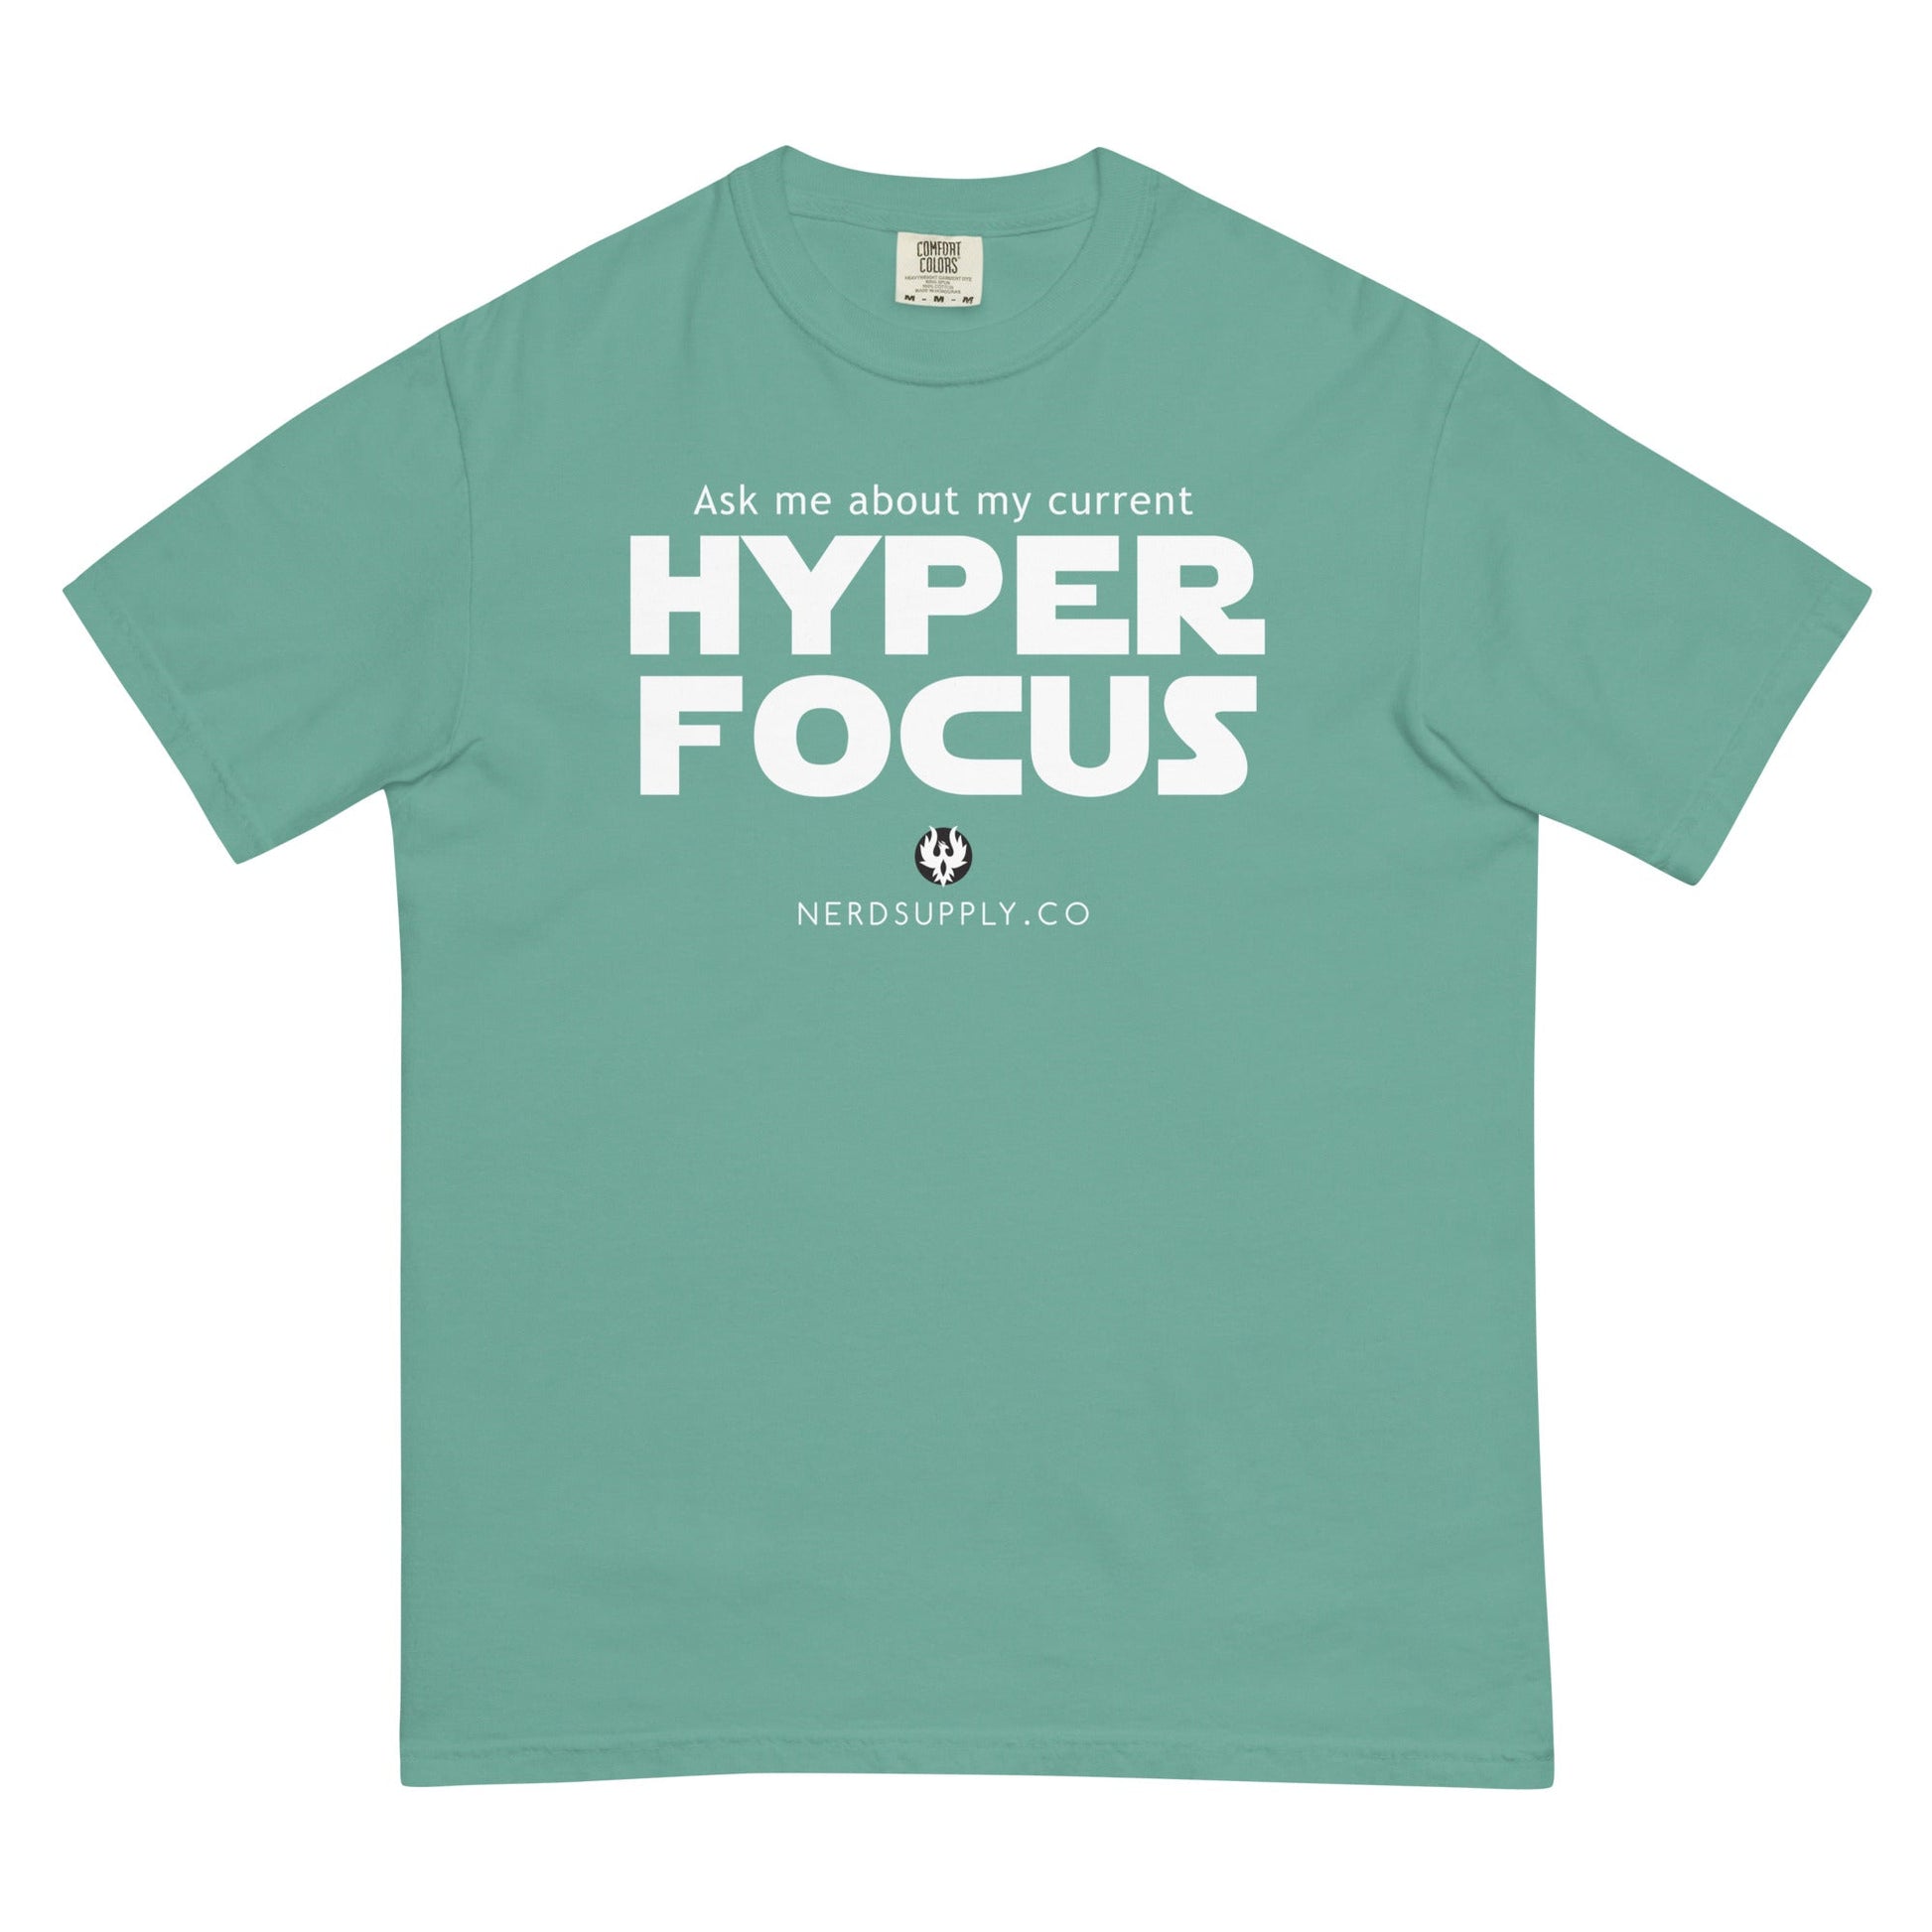 "Ask me about my current Hyper Focus" Star Font Tee - The Nerd Supply Company